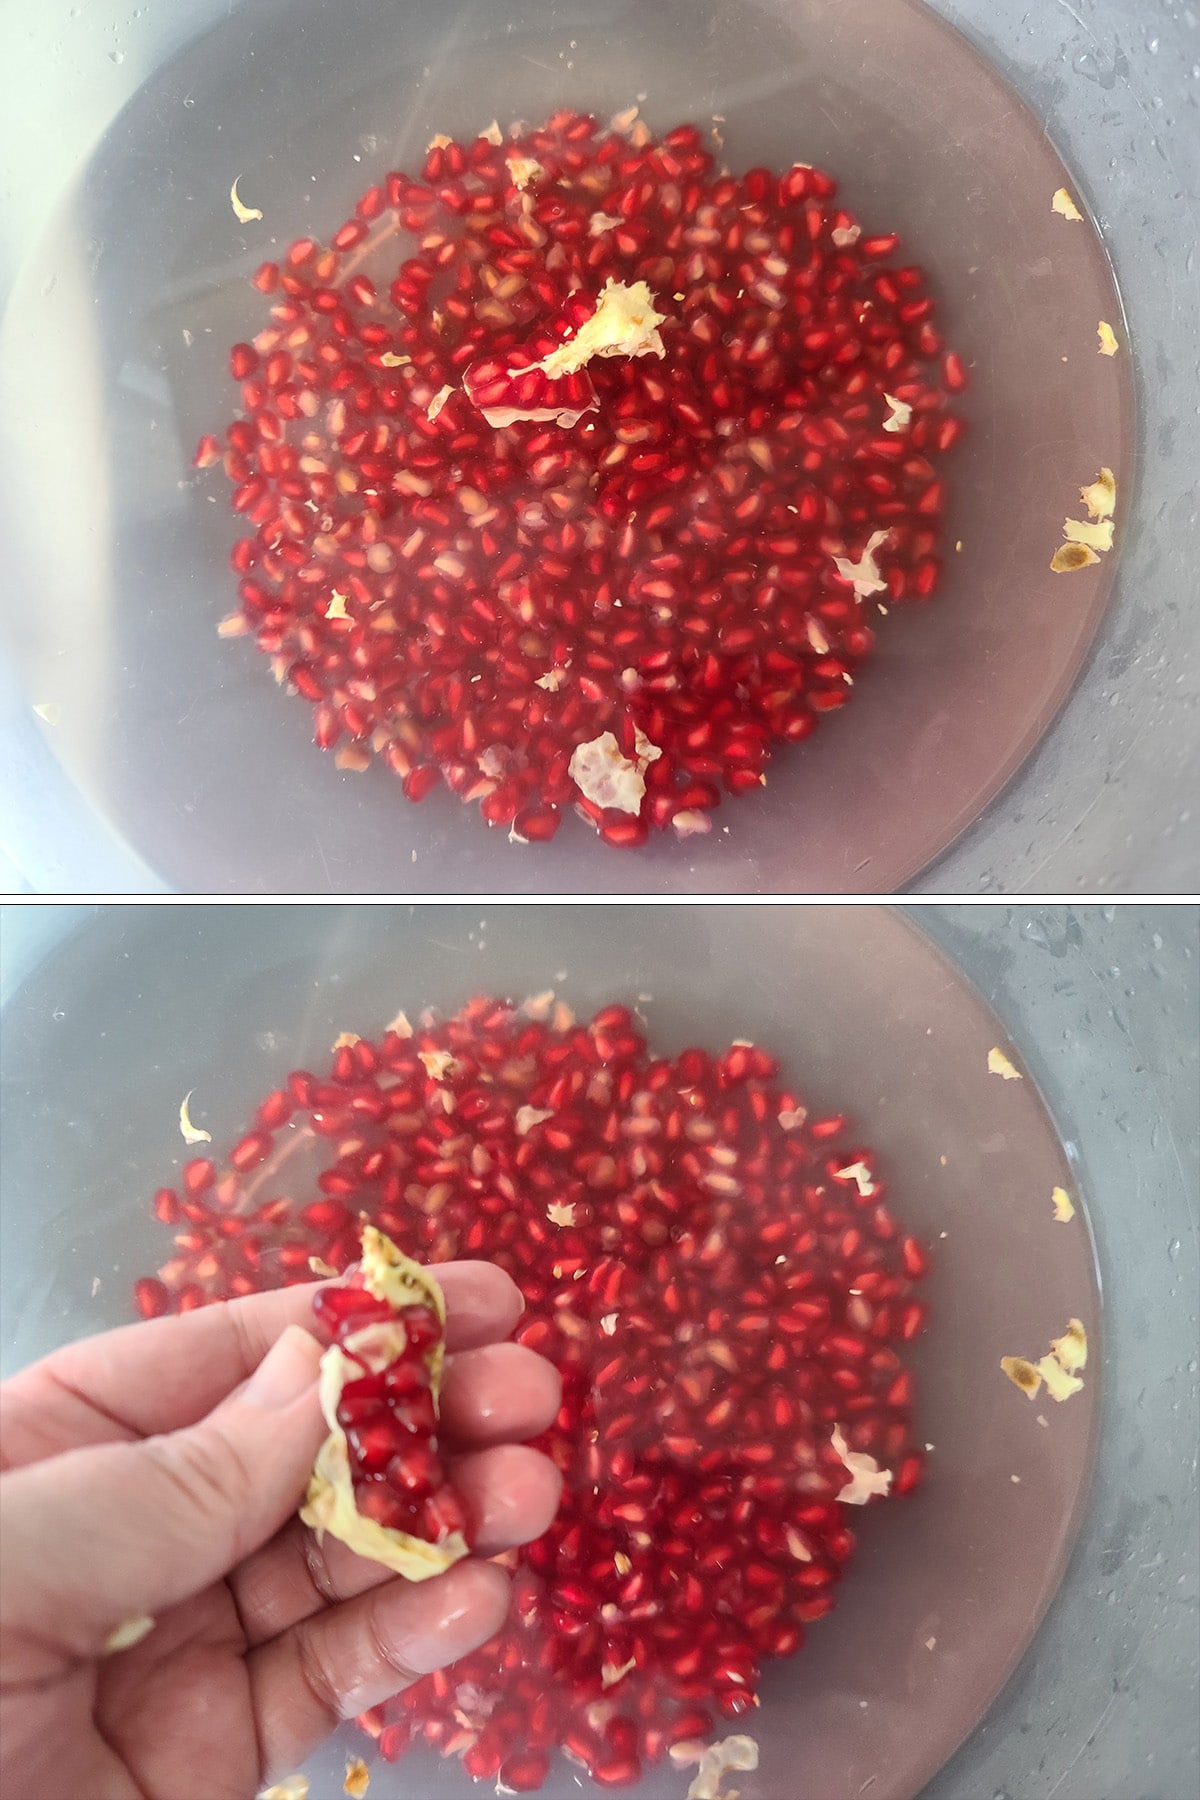 Pieces of membrane are being picked off a section of pomegranate.